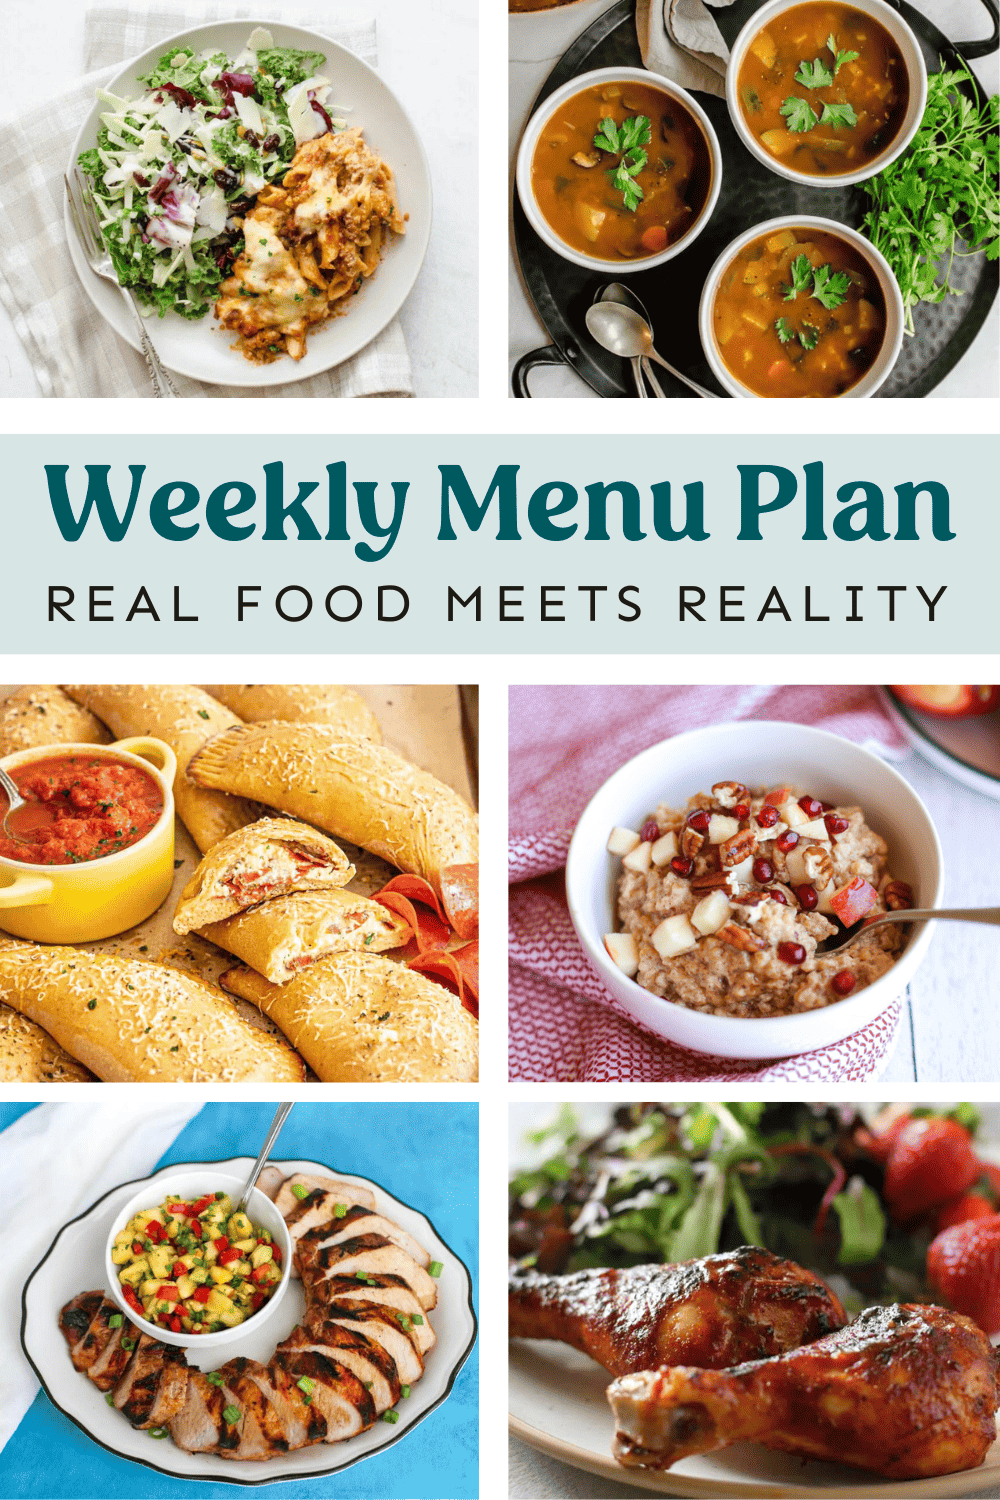 Collage of meals on the menu plan.